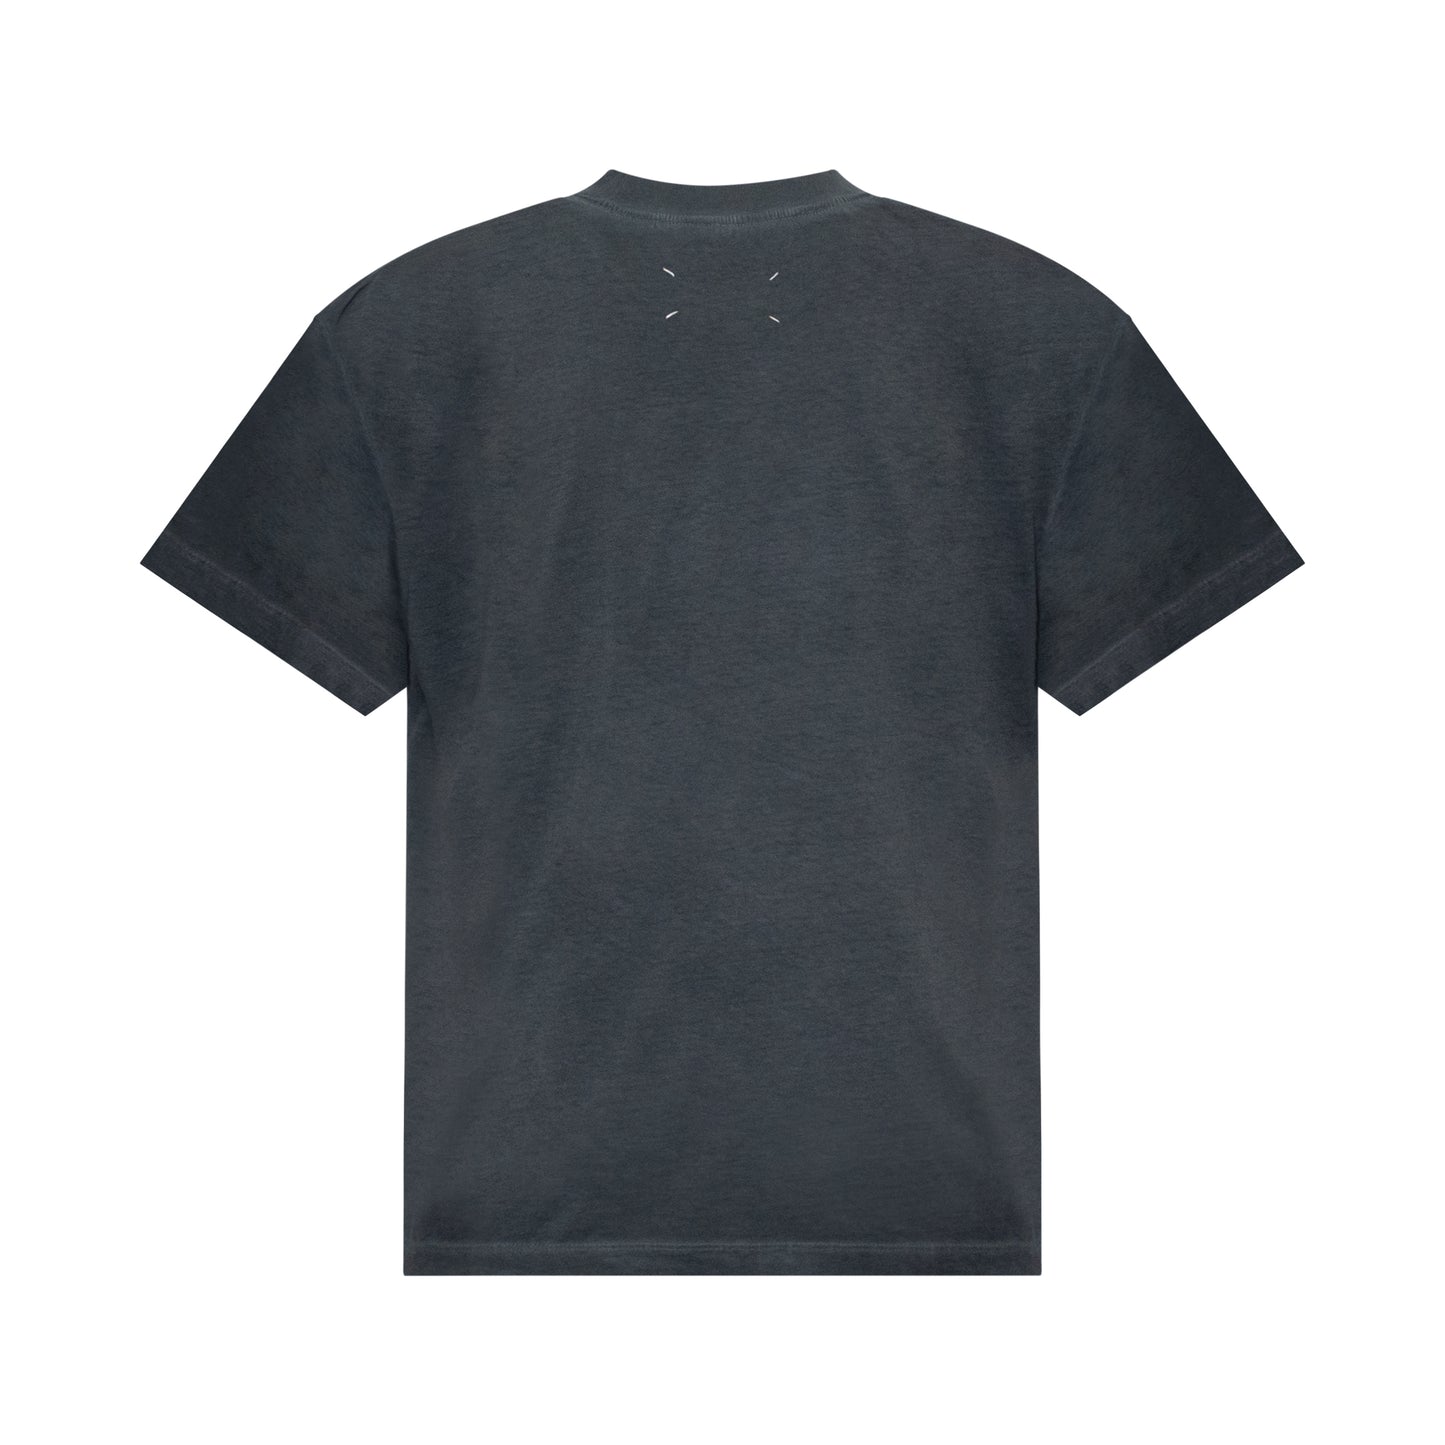 Cameo Print T-Shirt in Anthracite